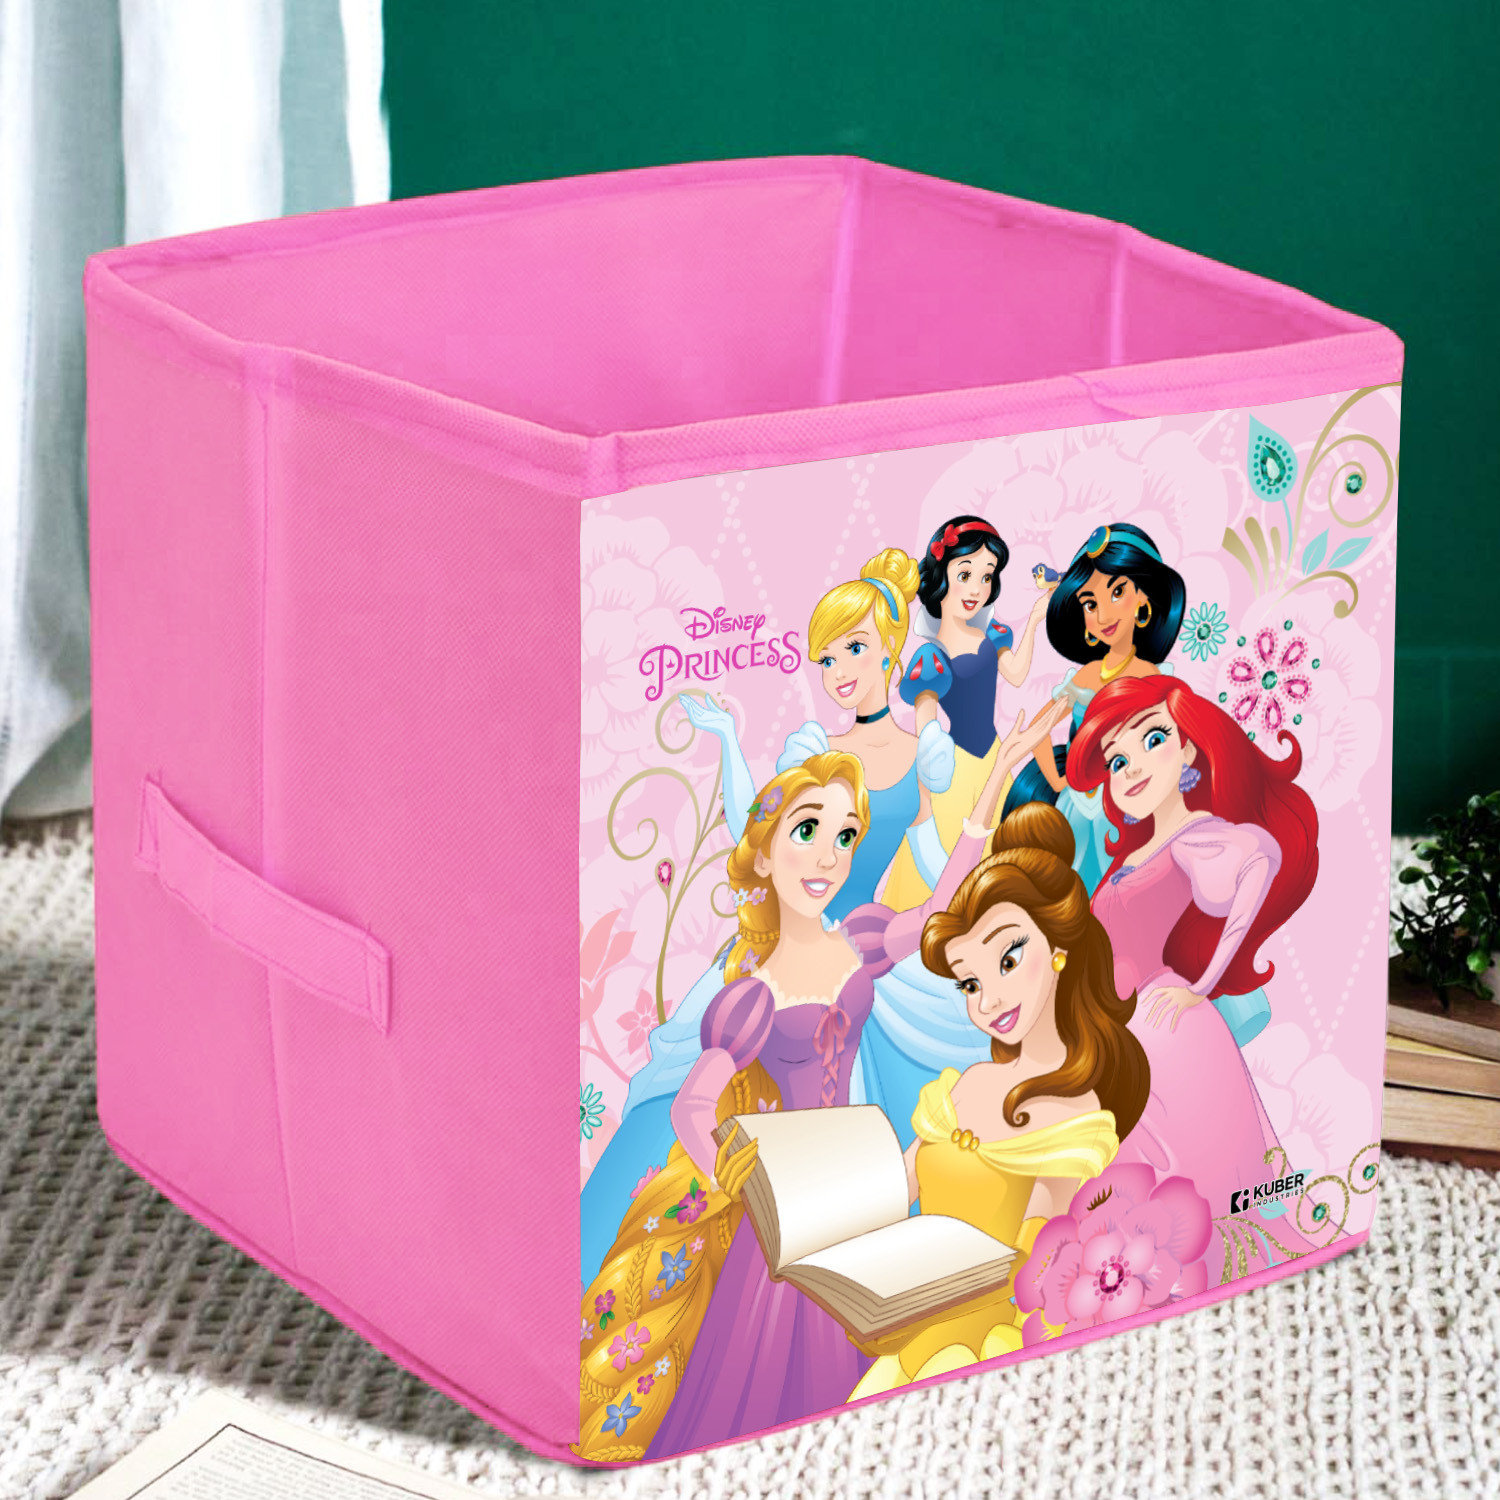 Kuber Industries Disney Princess Print Storage Box|Foldable Clothes Organizer|Collapsible Storage Basket With Handle For Toys,Books,30 Ltr.(Pink)